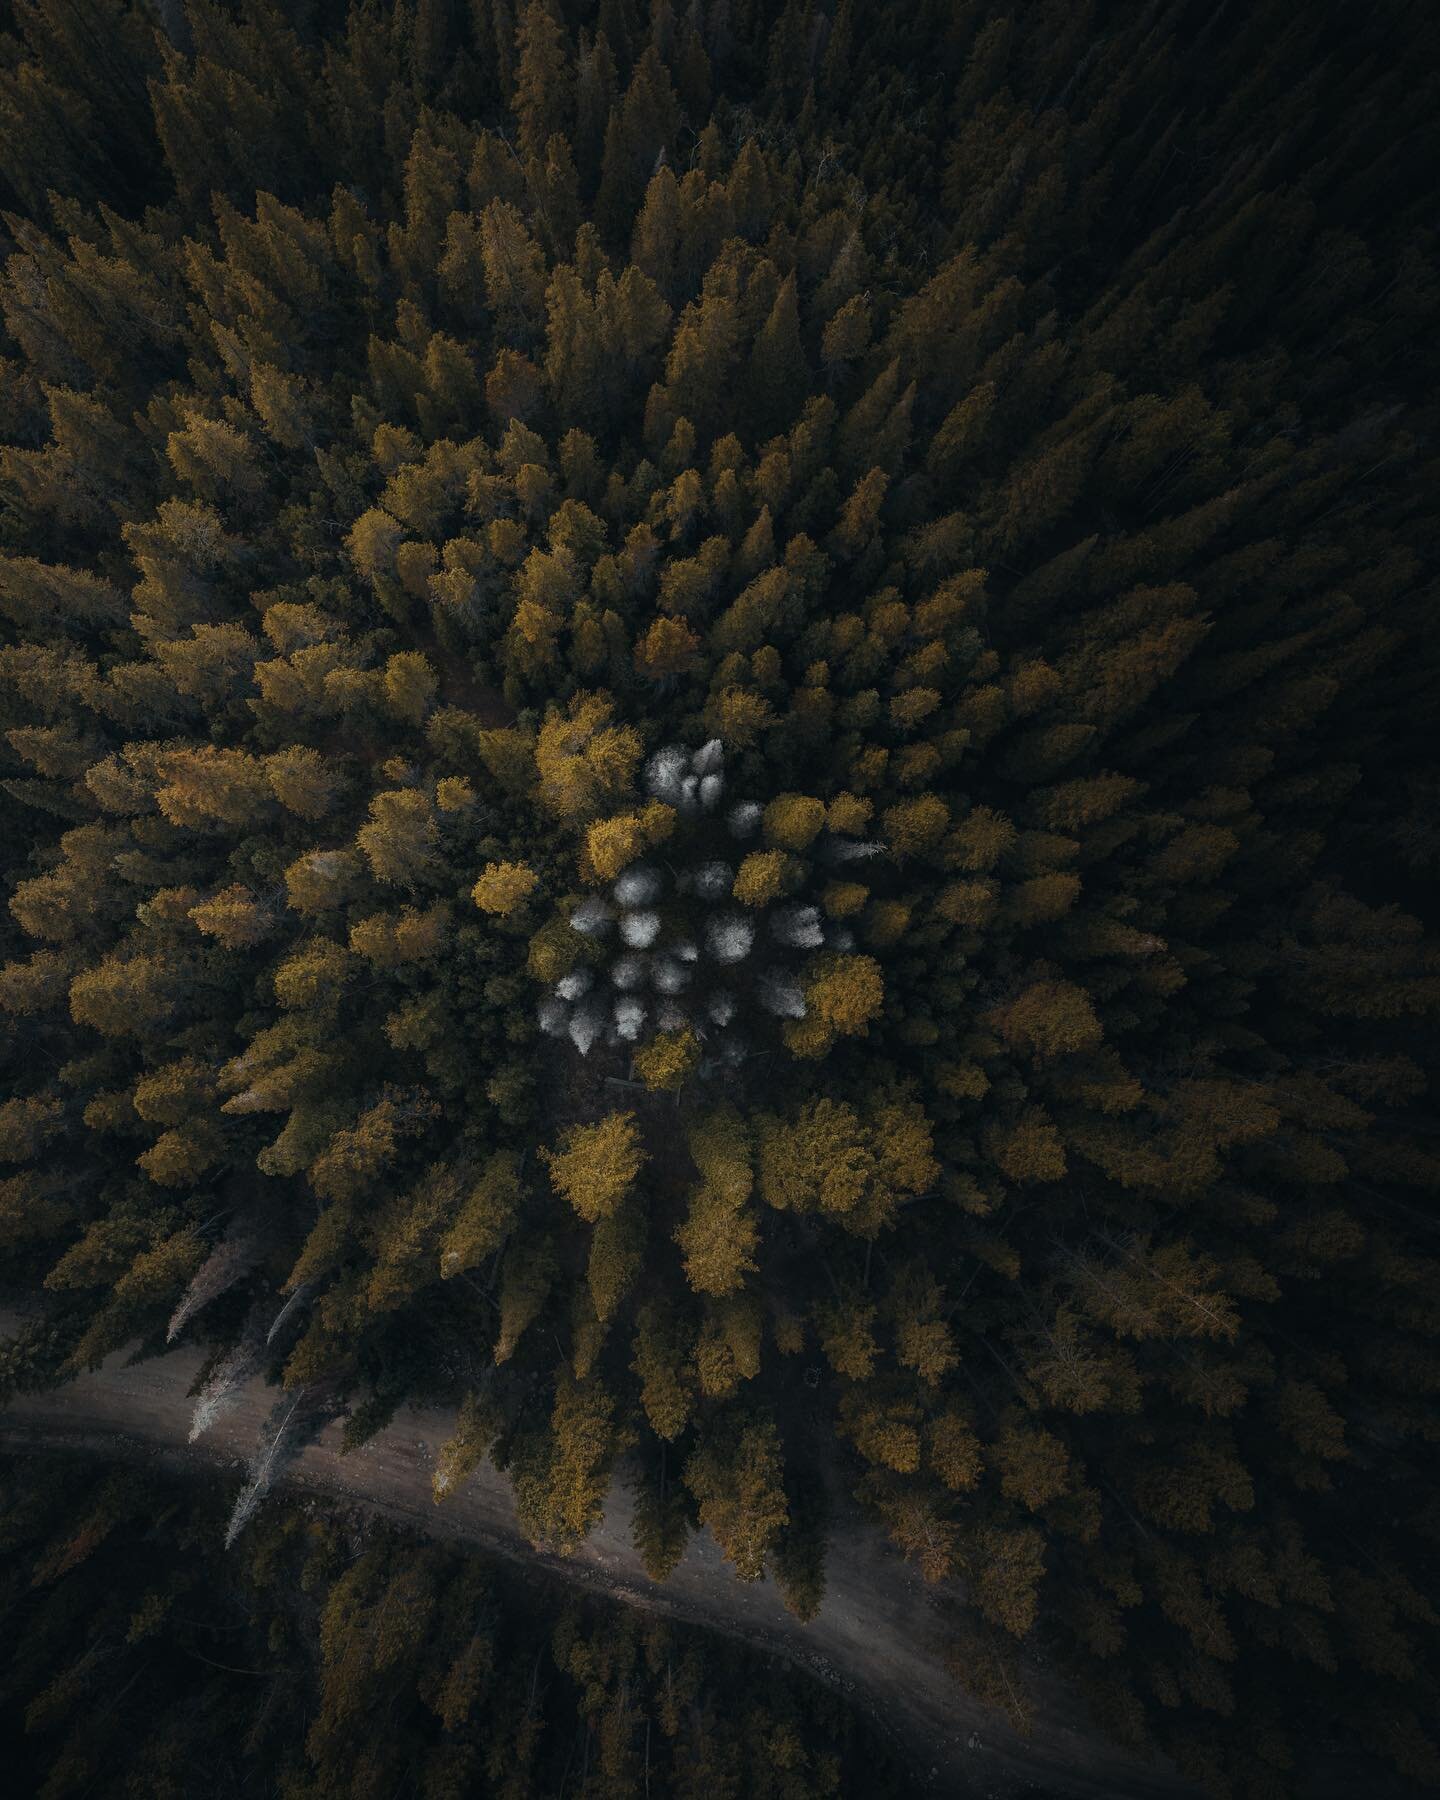 Nature is beautiful. Perspective is powerful.

#ourlonelyplanet #roamtheplanet #roamtheworld #adventure #forest #nature #naturephotography #travel #drone #fromabove #colorado